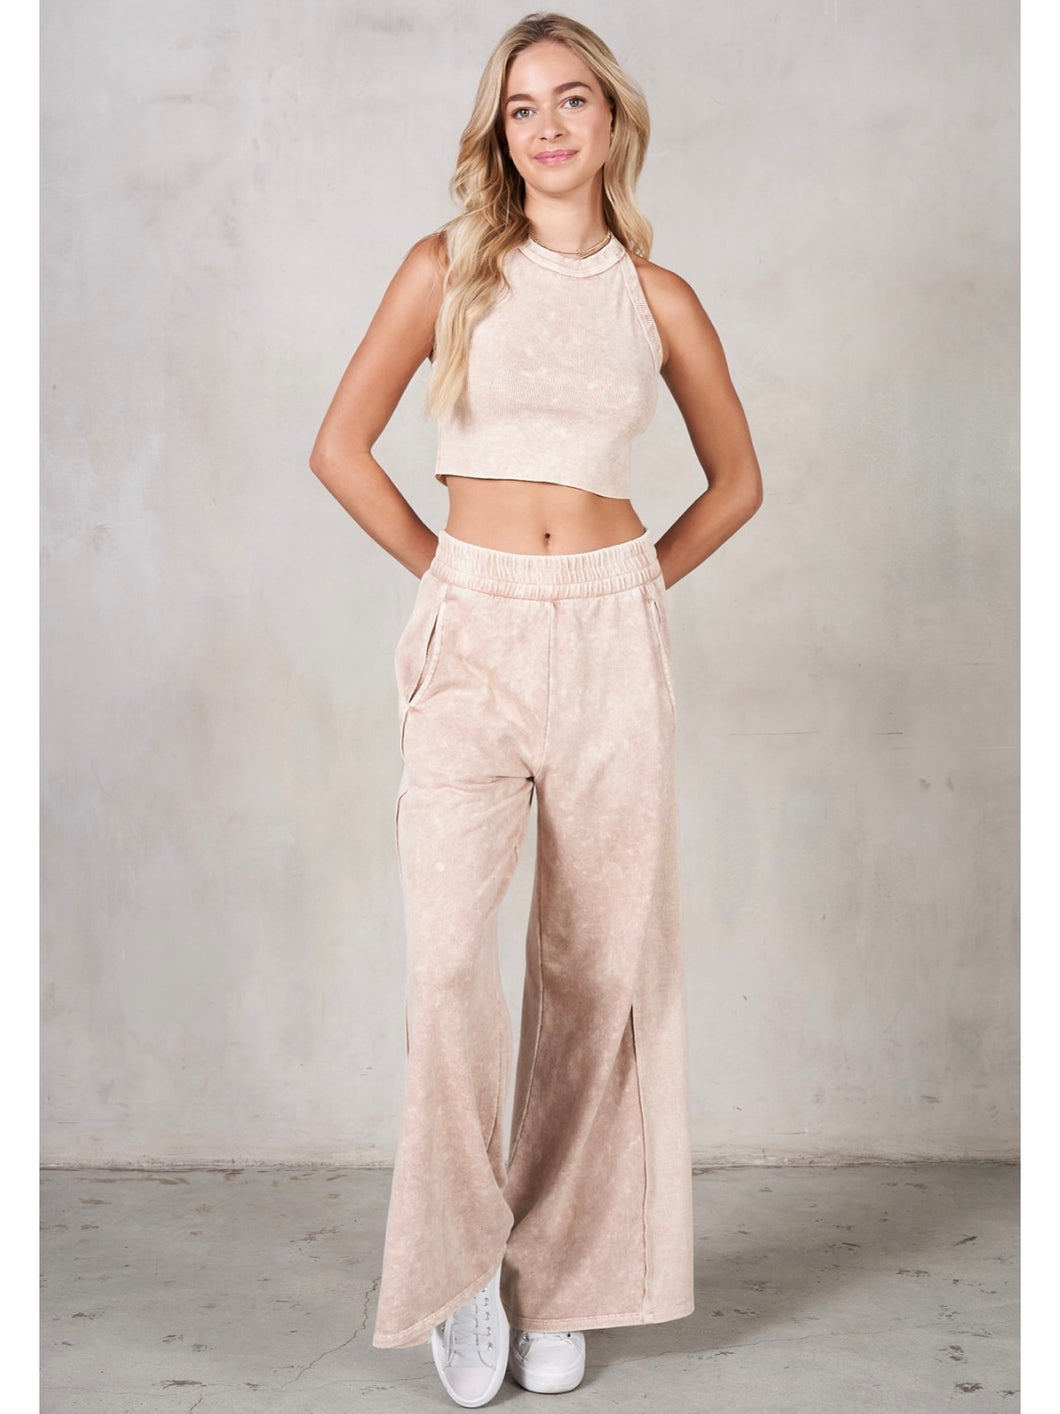 Taupe Mineral Wash Crop Top & Pants Set